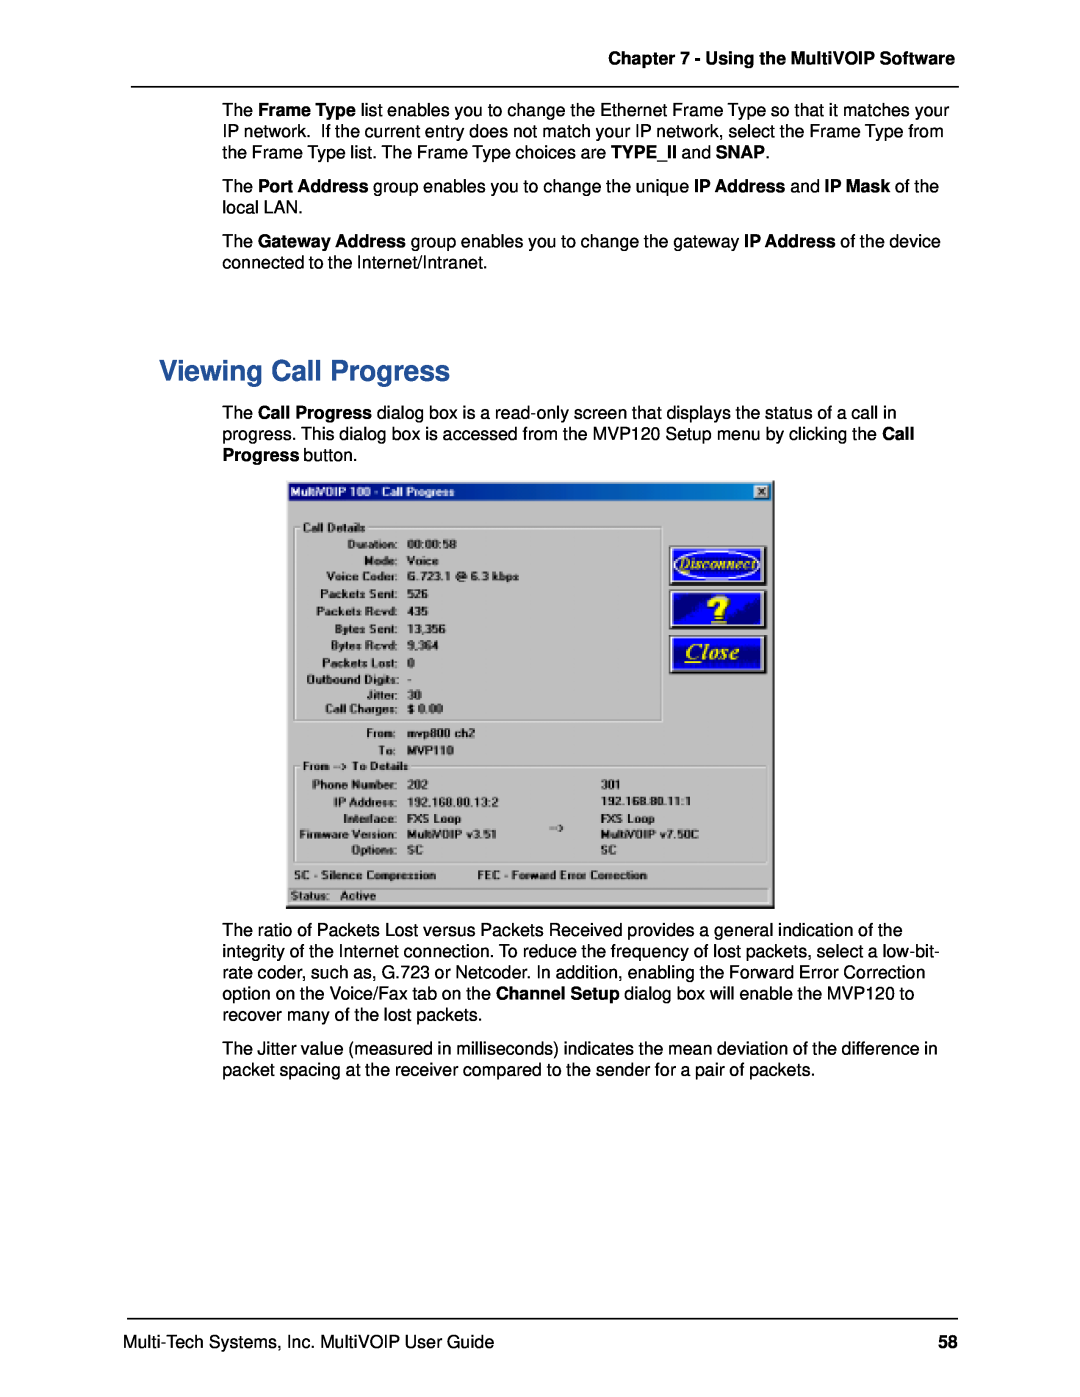 Multi-Tech Systems MVP120 manual Viewing Call Progress, Using the MultiVOIP Software 